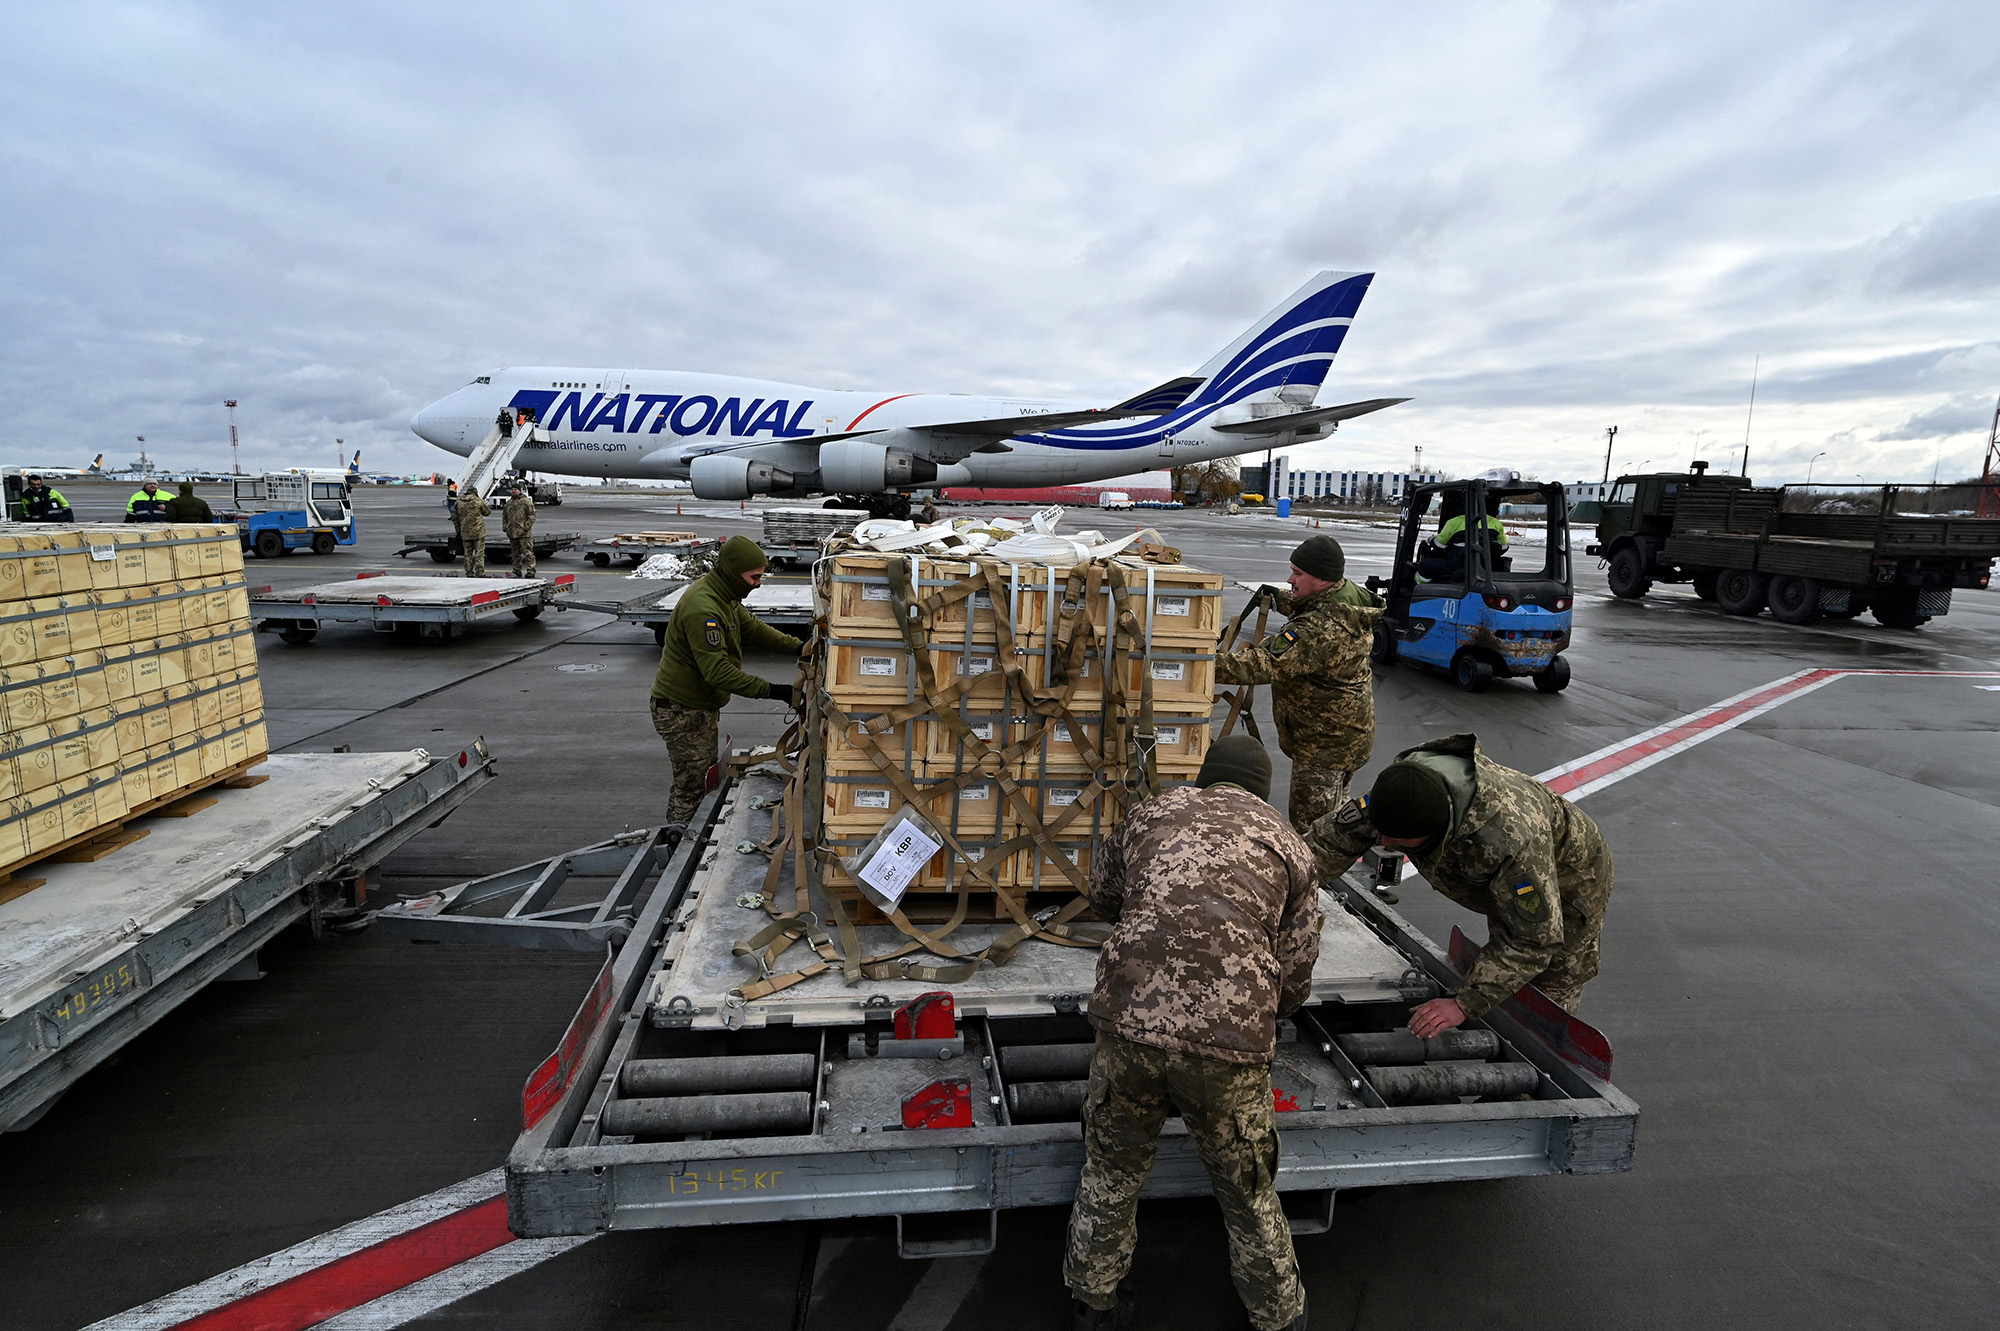 Ukrainian military servicemen unload a Boeing 747-412 carrying US military aid at Kyiv's Boryspil airport, Ukraine, on February 9, 2022.